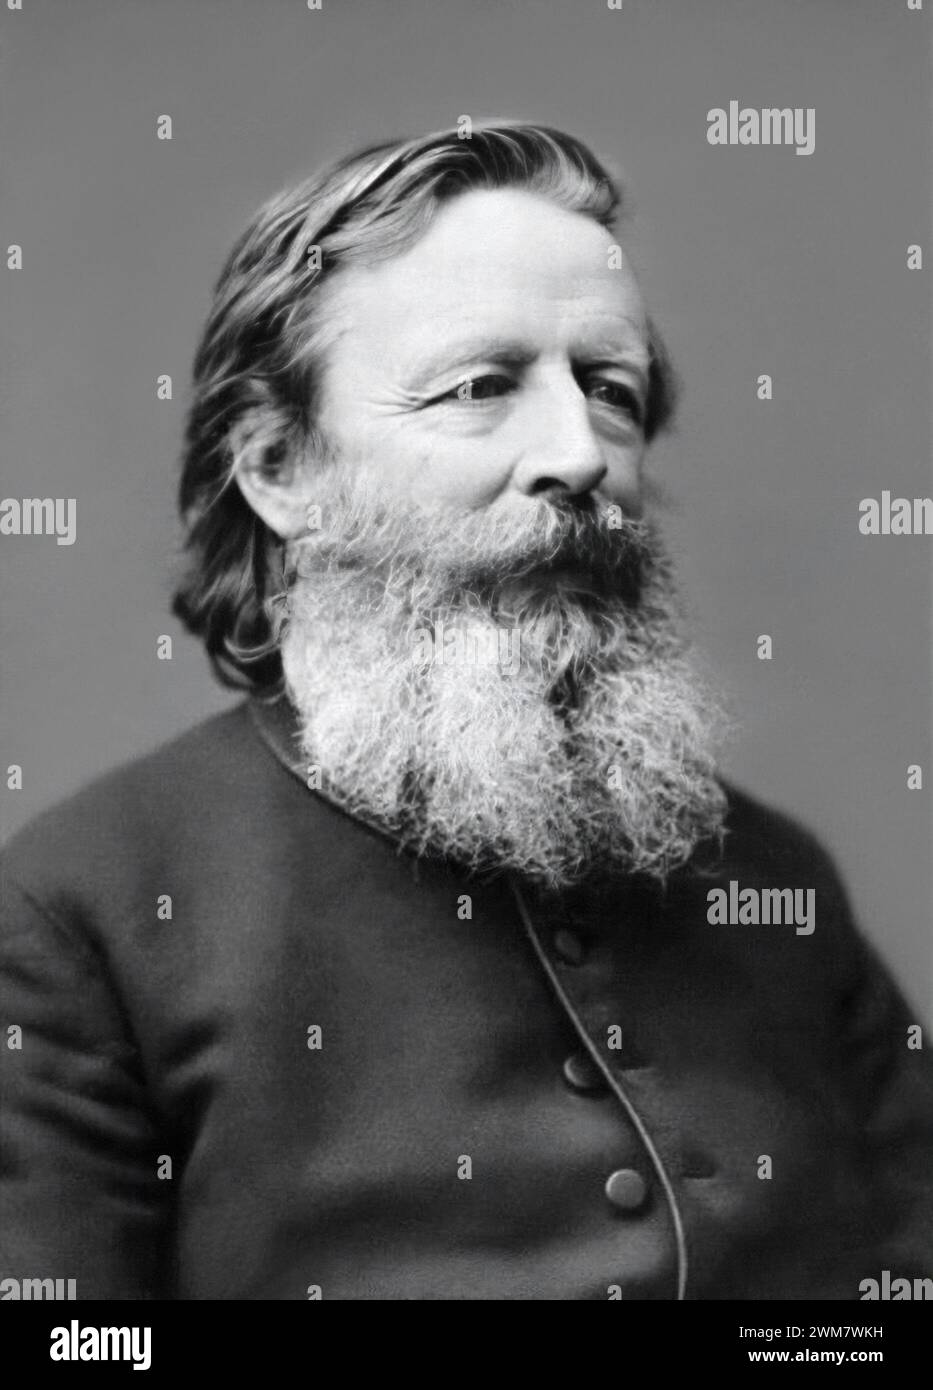 Thomas K. Beecher (1824-1900), liberal pastor of Park Church in Elmira, NY, was the son of Lyman Beecher and the brother of Henry Ward Beecher and Harriet Beecher Stowe. (USA) Stock Photo